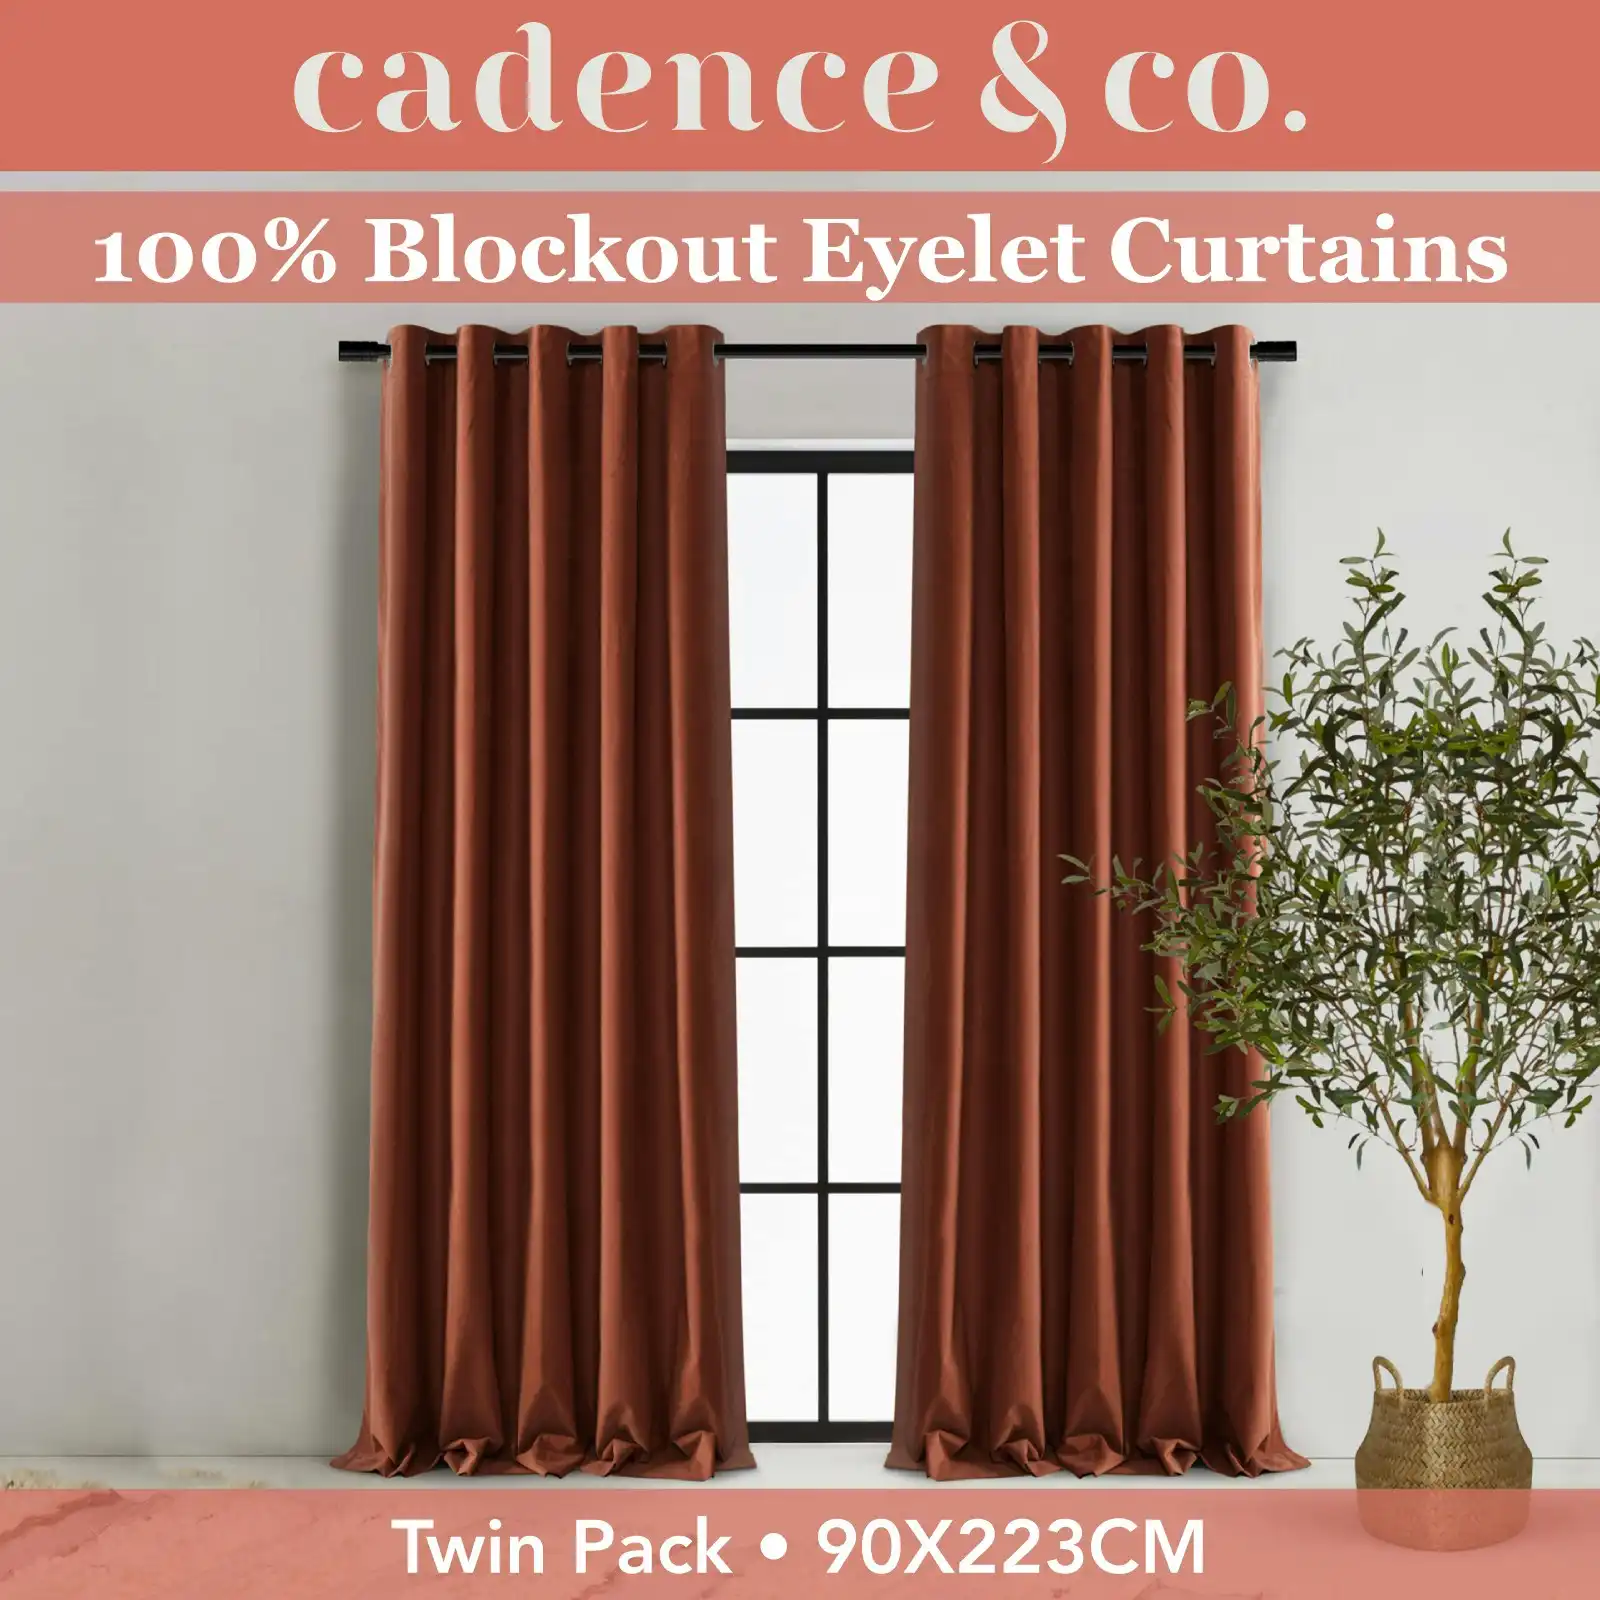 Cadence & Co Byron Matte Velvet 100% Blockout Eyelet Curtains Twin Pack Rust 90x223cm